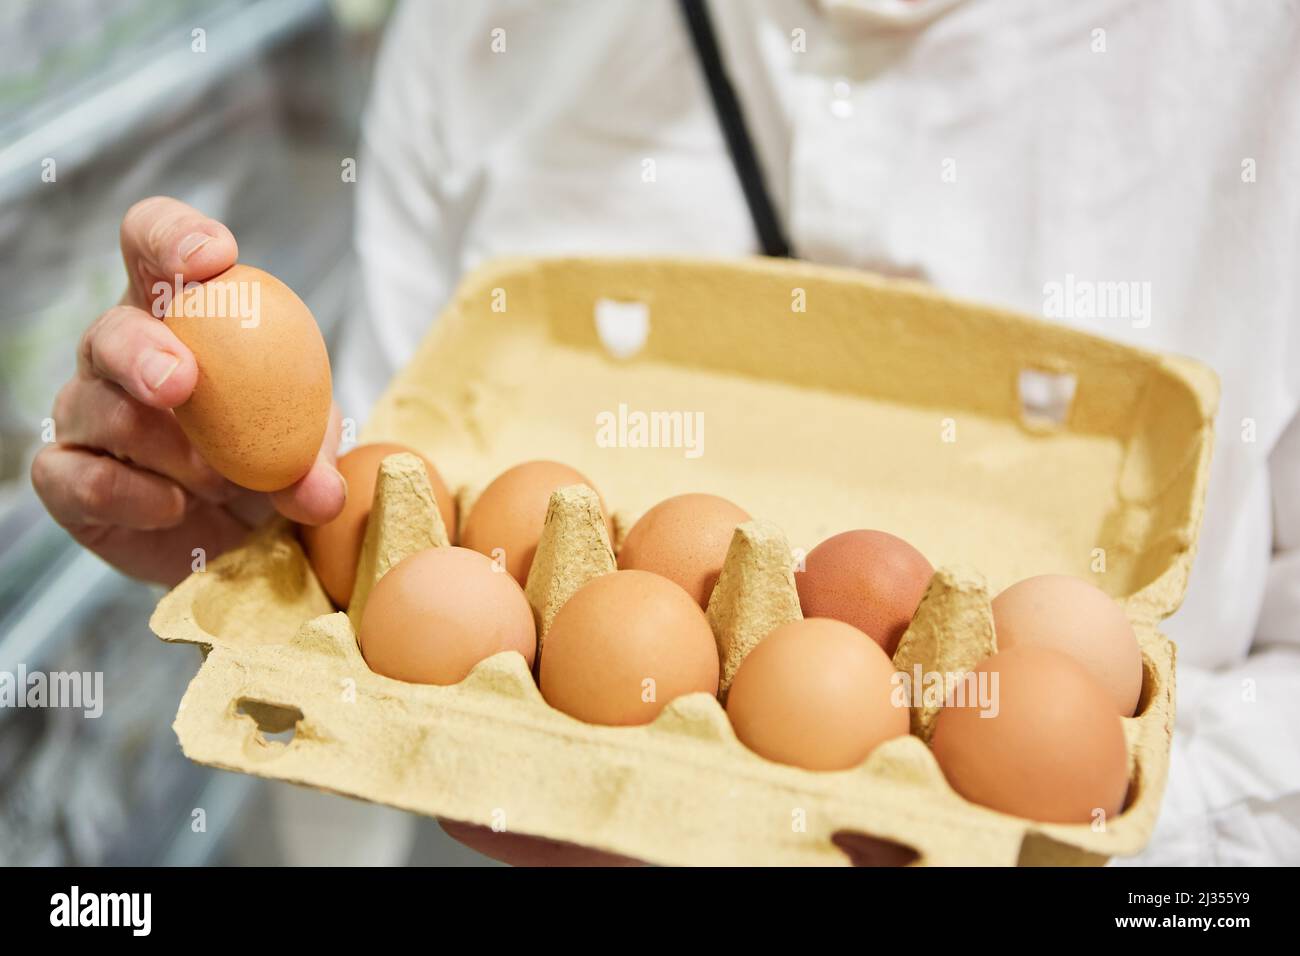 Customer holding a cardboard box of free range eggs in supermarket or discount store Stock Photo